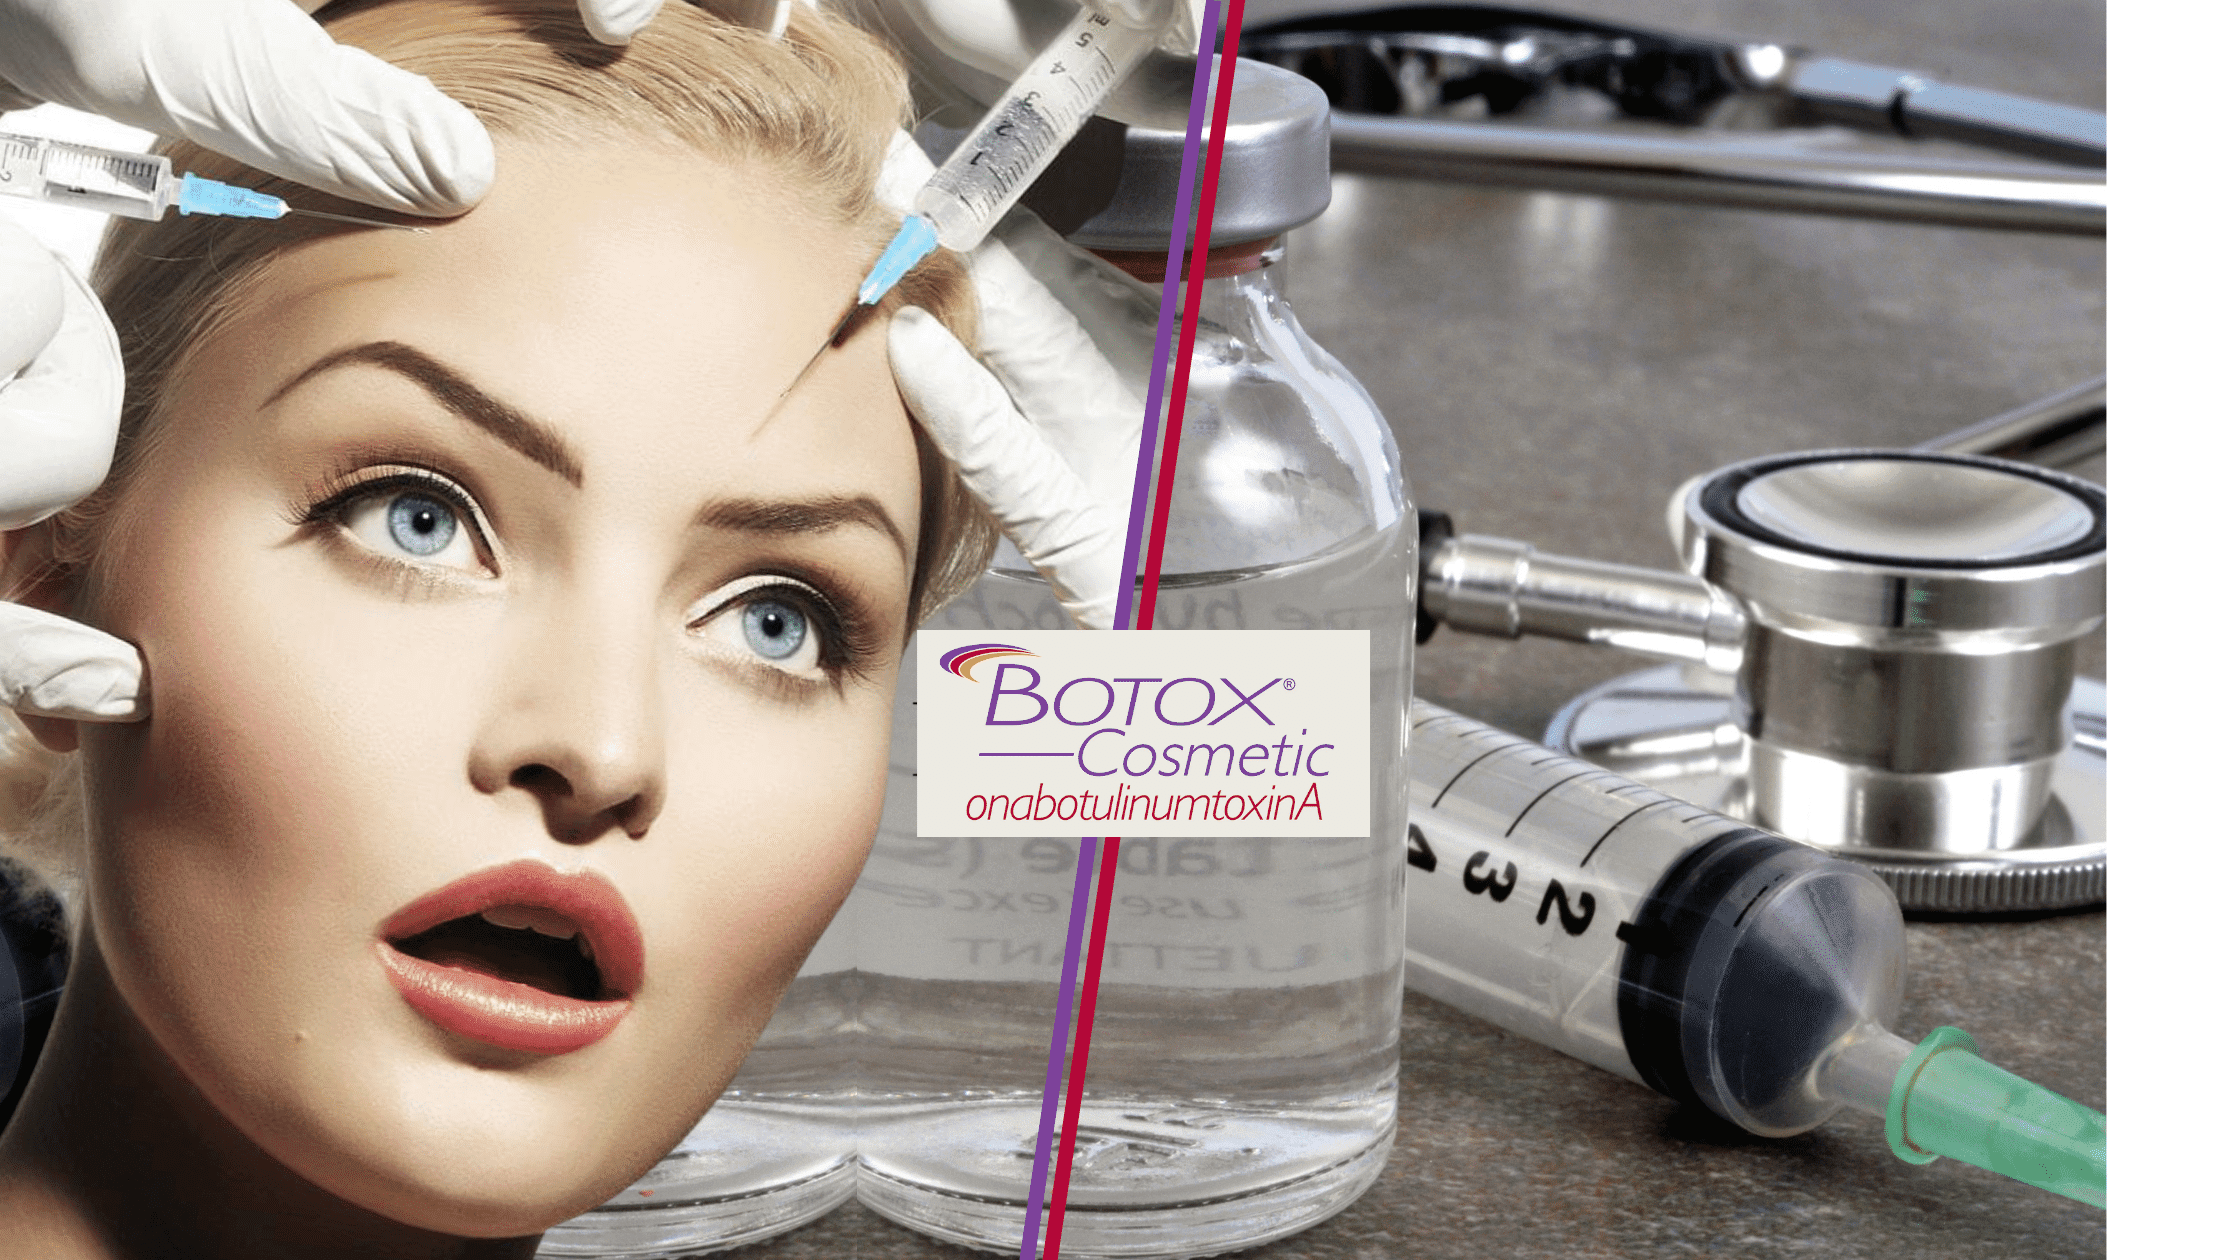 How To Avoid The Frozen Botox Look, By Barbie's Beauty Bits